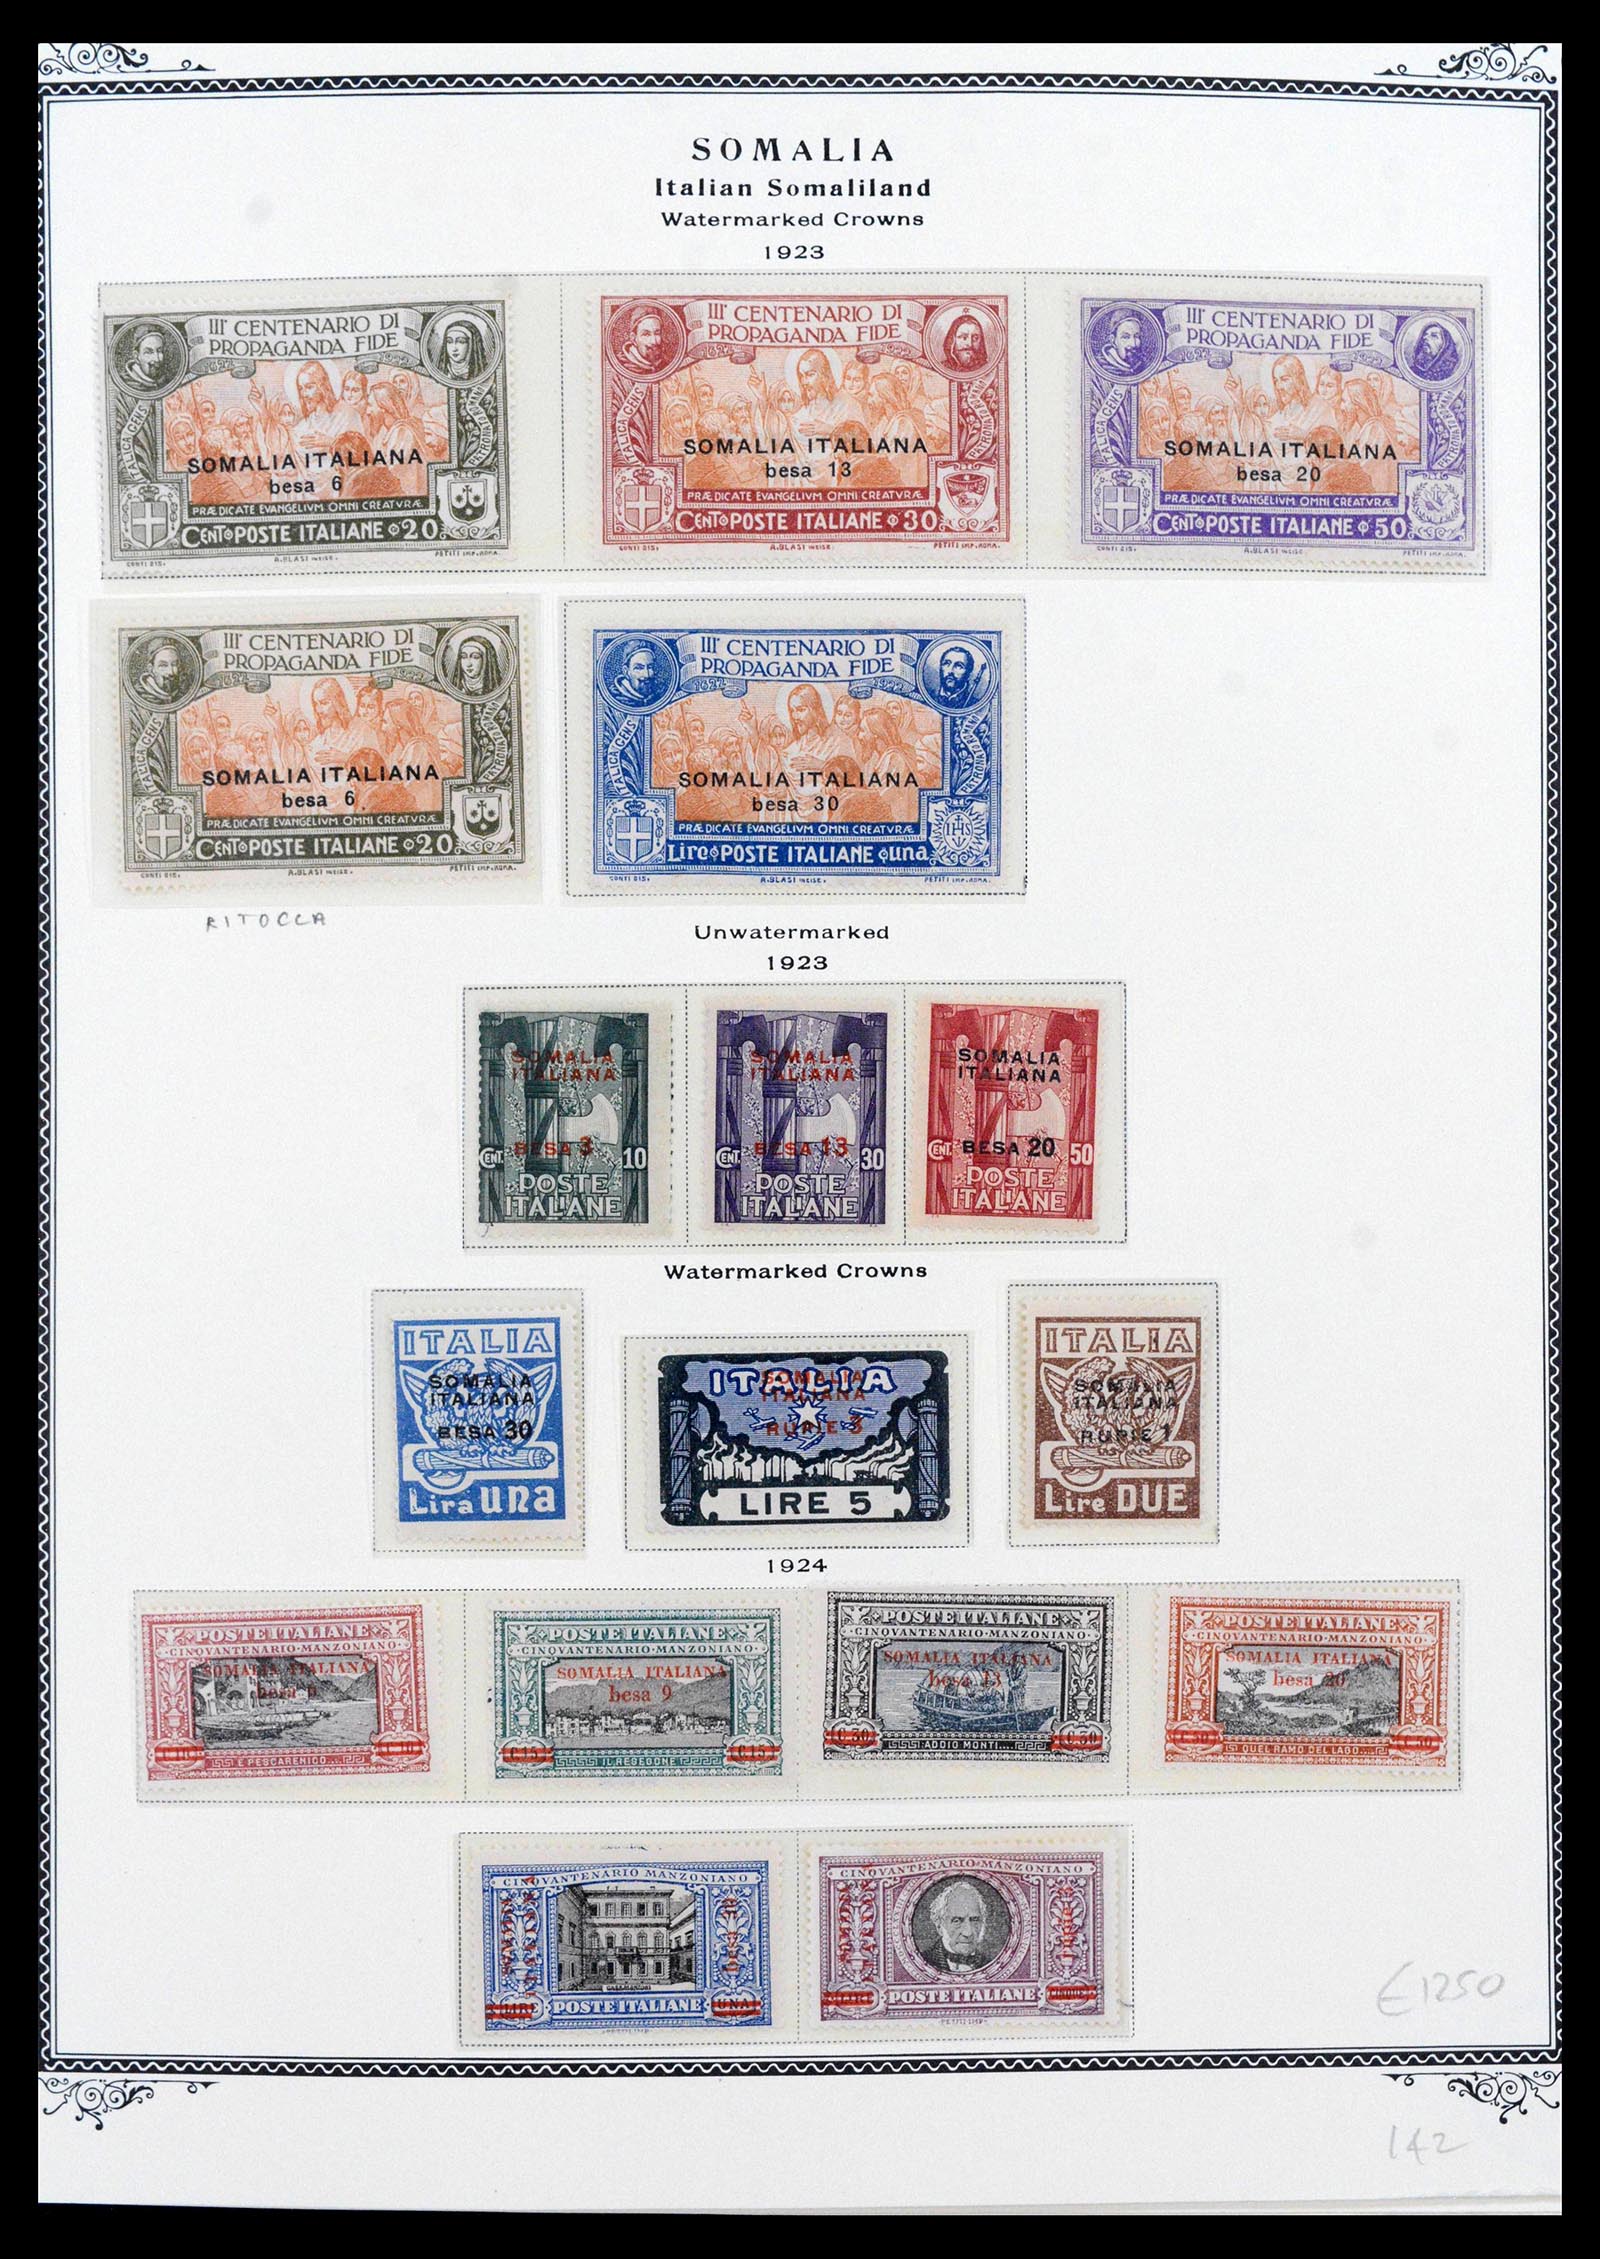 39011 0004 - Stamp collection 39011 Somalia complete 1903-1960.